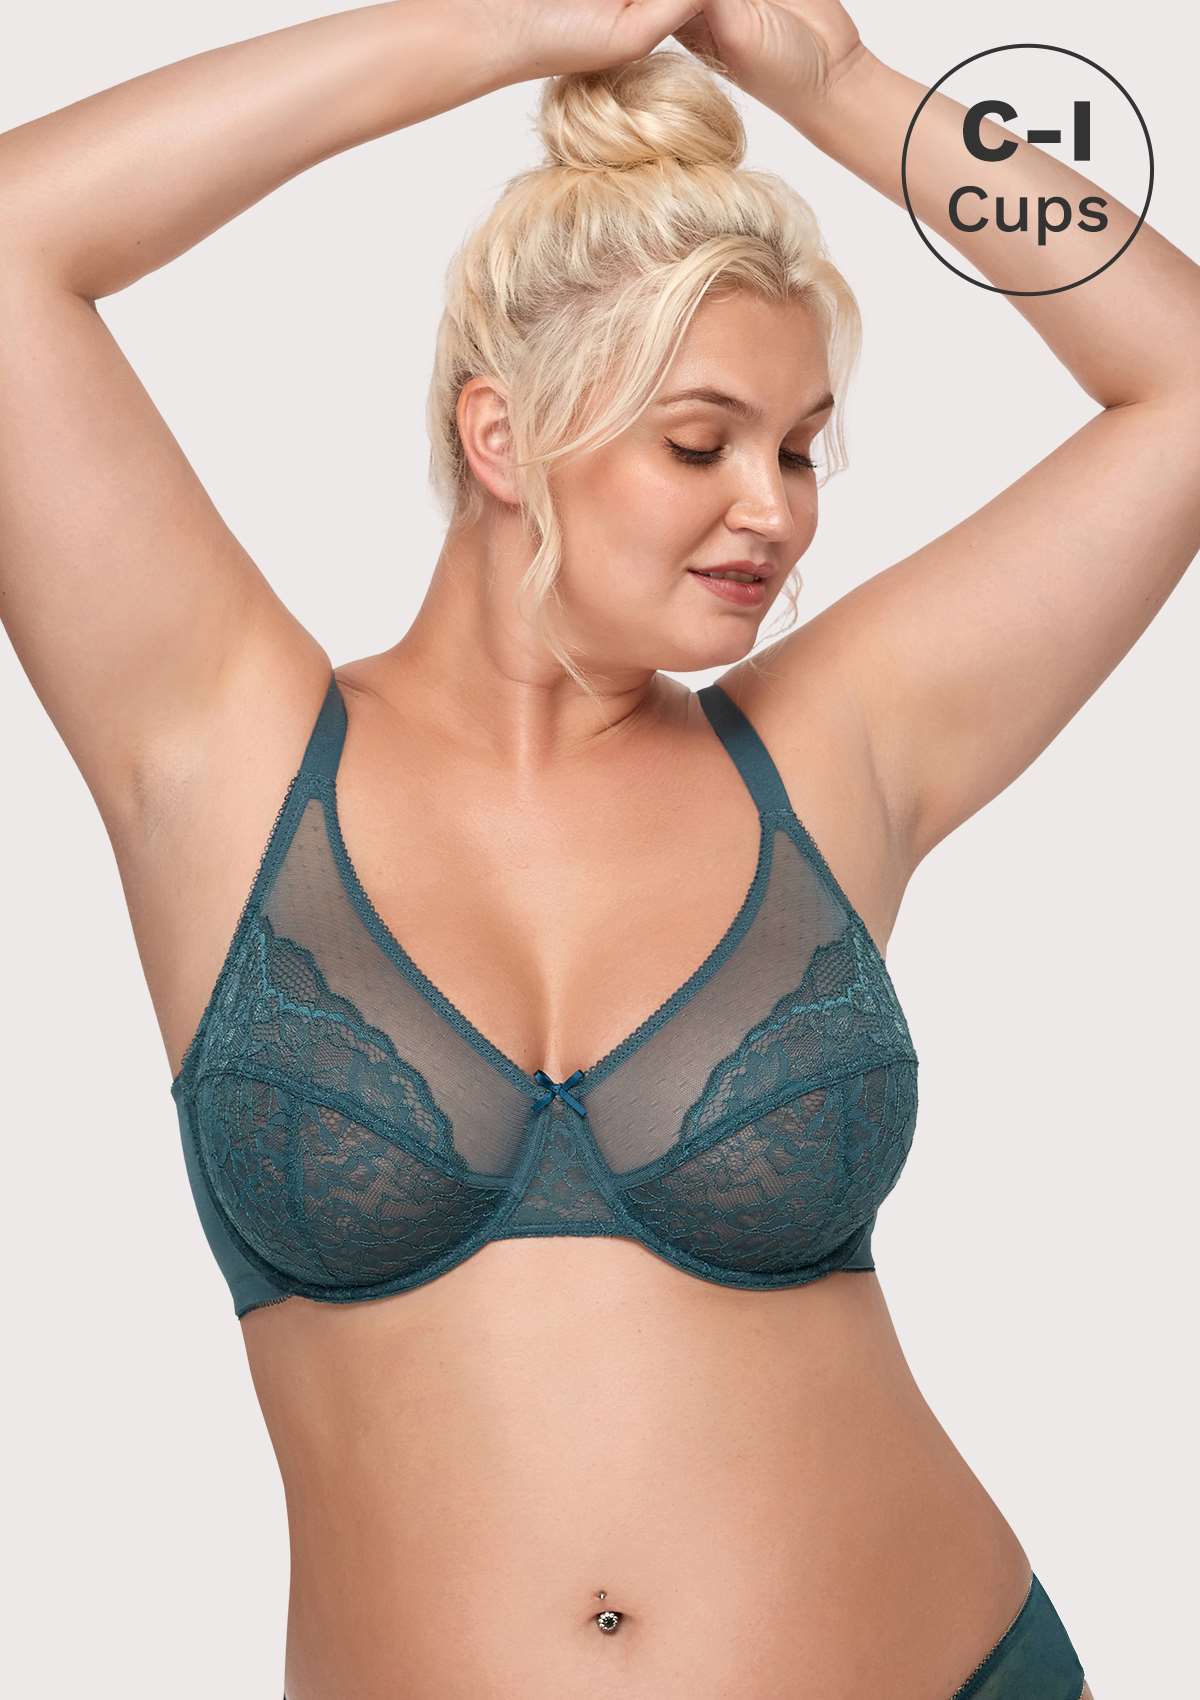 HSIA Enchante Full Coverage Bra: Supportive Bra For Big Busts - Balsam Blue / 46 / D